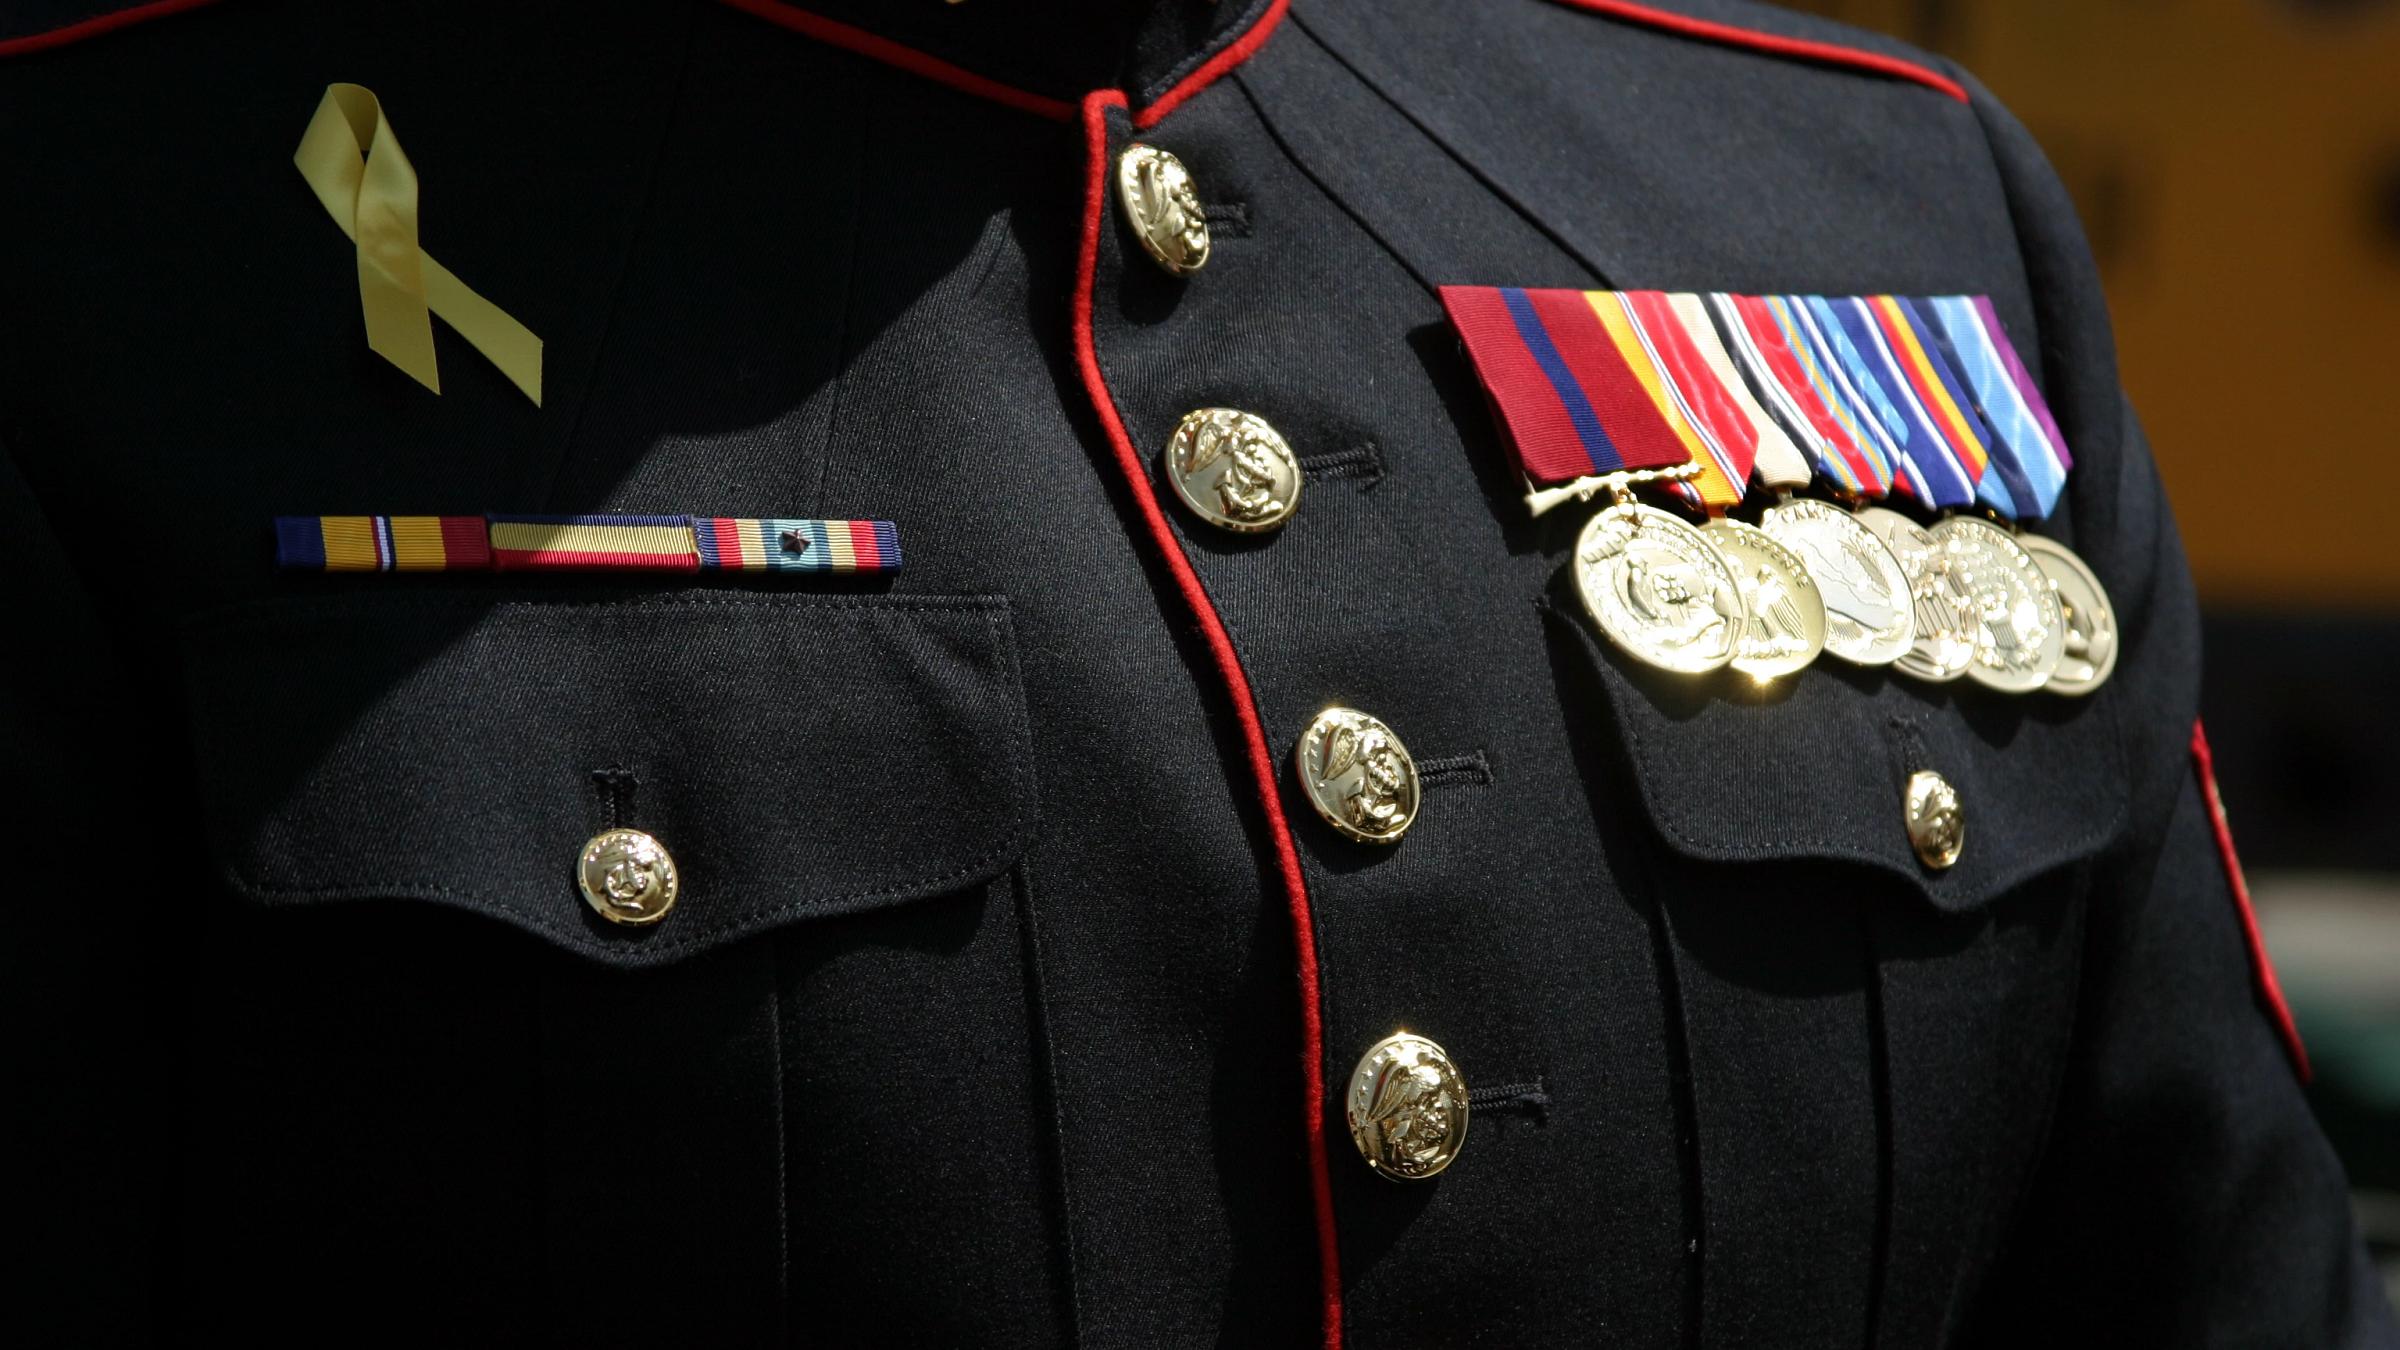 Close up of a military uniform with awards.